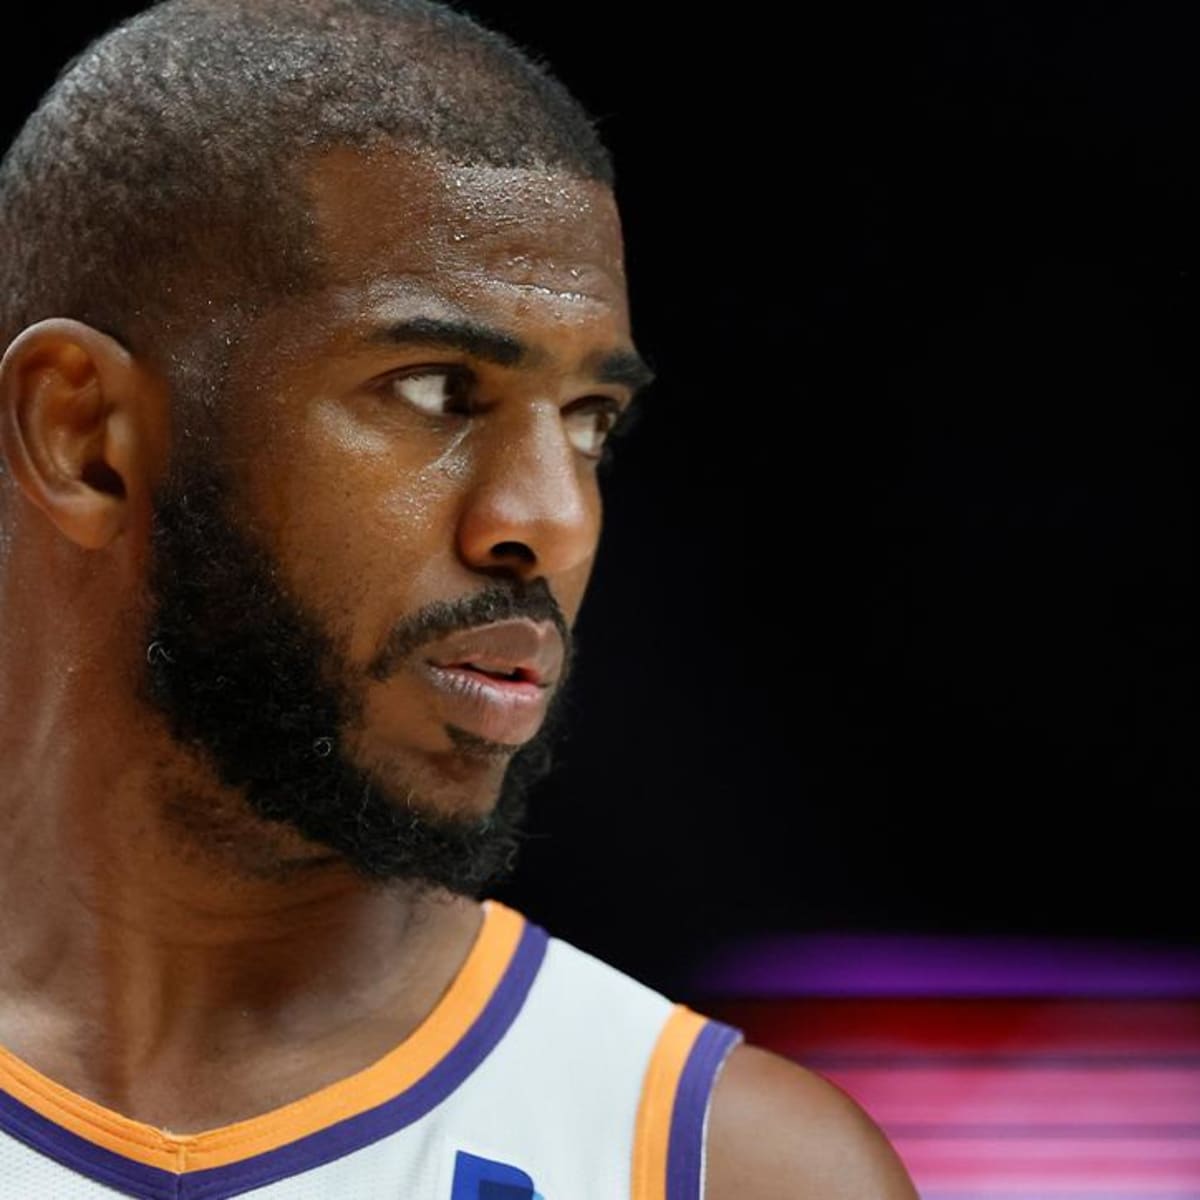 Chris Paul Calls Out NBA After Fan Puts Hands on His Family at Game